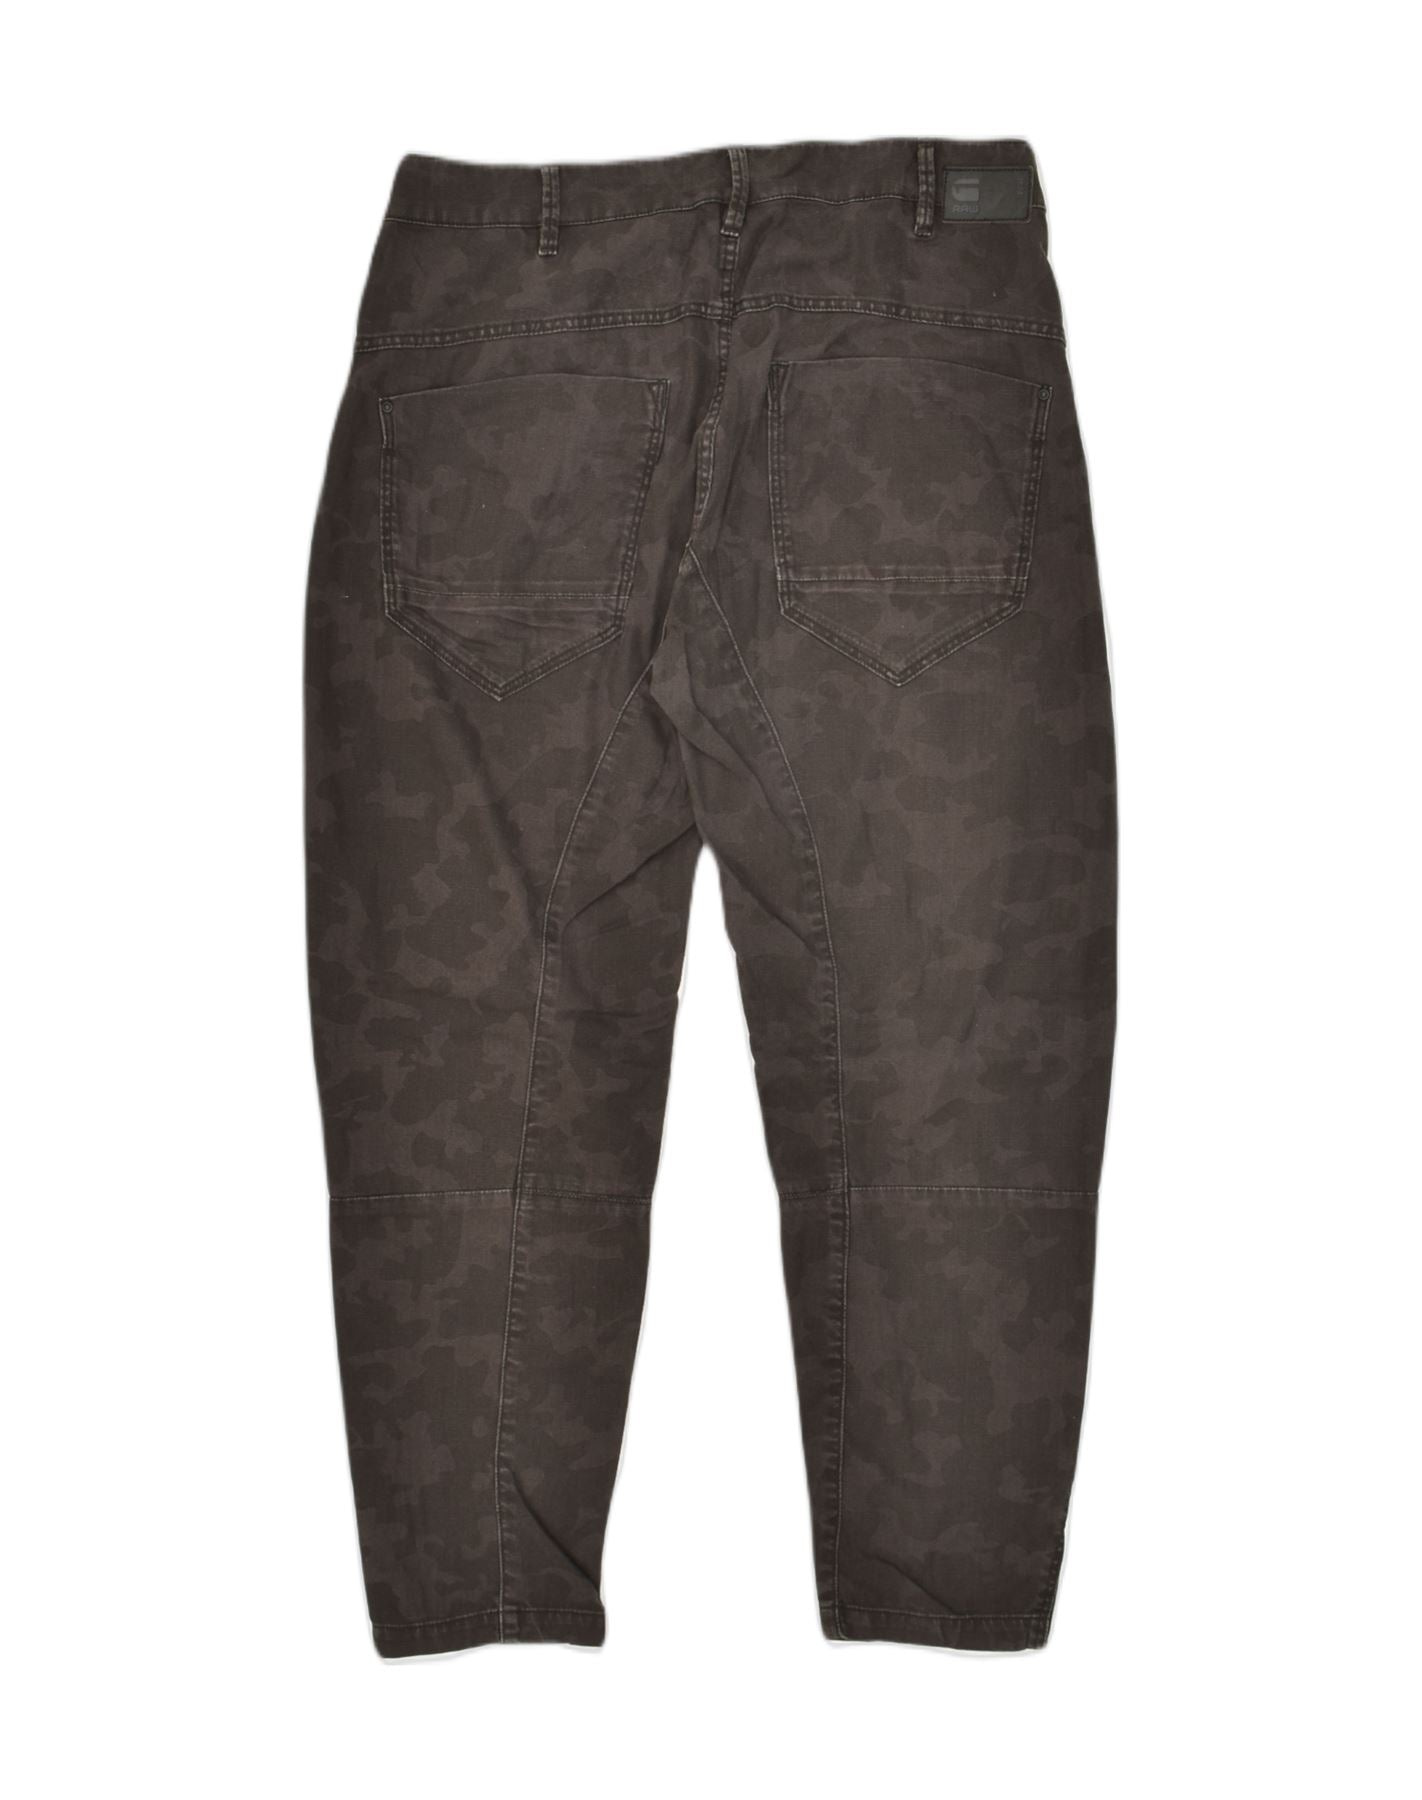 Buy G STAR RAW Olive Green & Black Printed 3D Tapered Cargo Trousers -  Trousers for Men 1276621 | Myntra